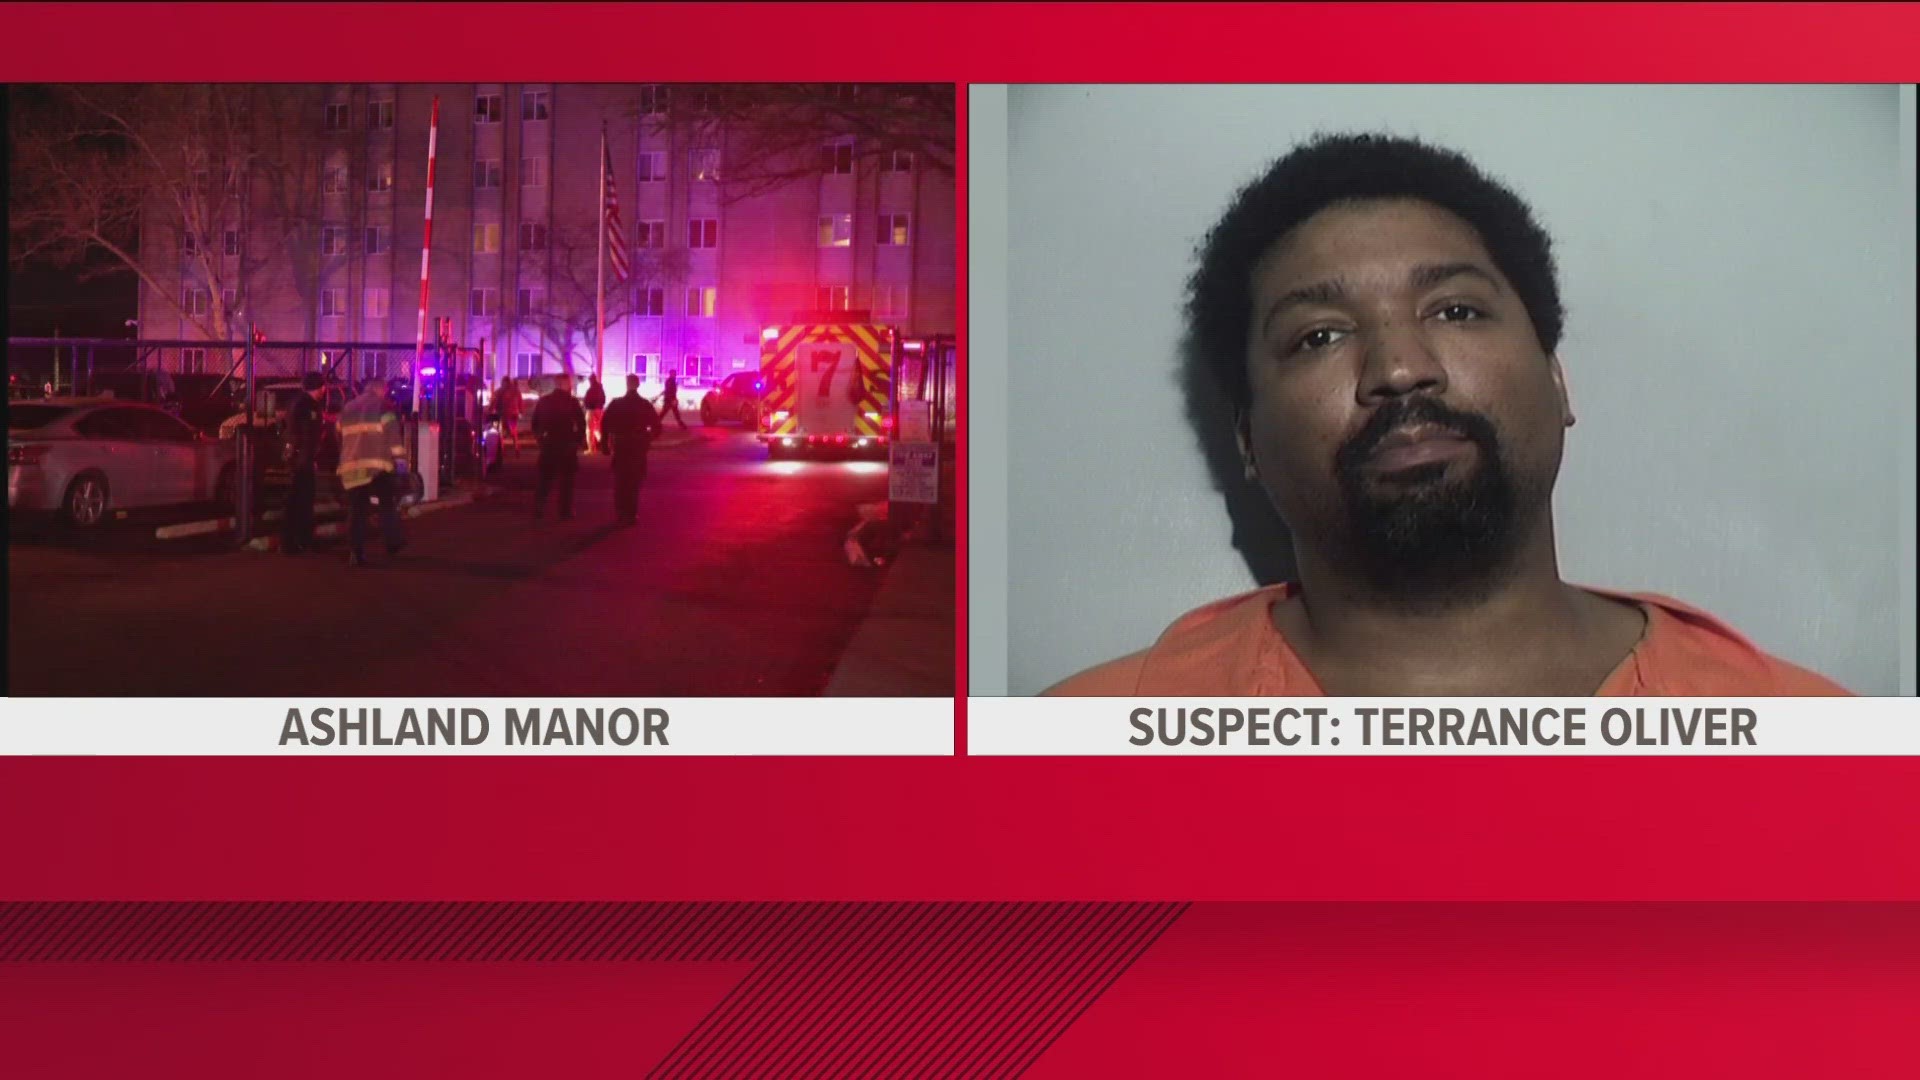 Police are searching for the suspect accused of shooting and killing Antron Tilman at the Ashland Manor apartment complex on Dec. 6.